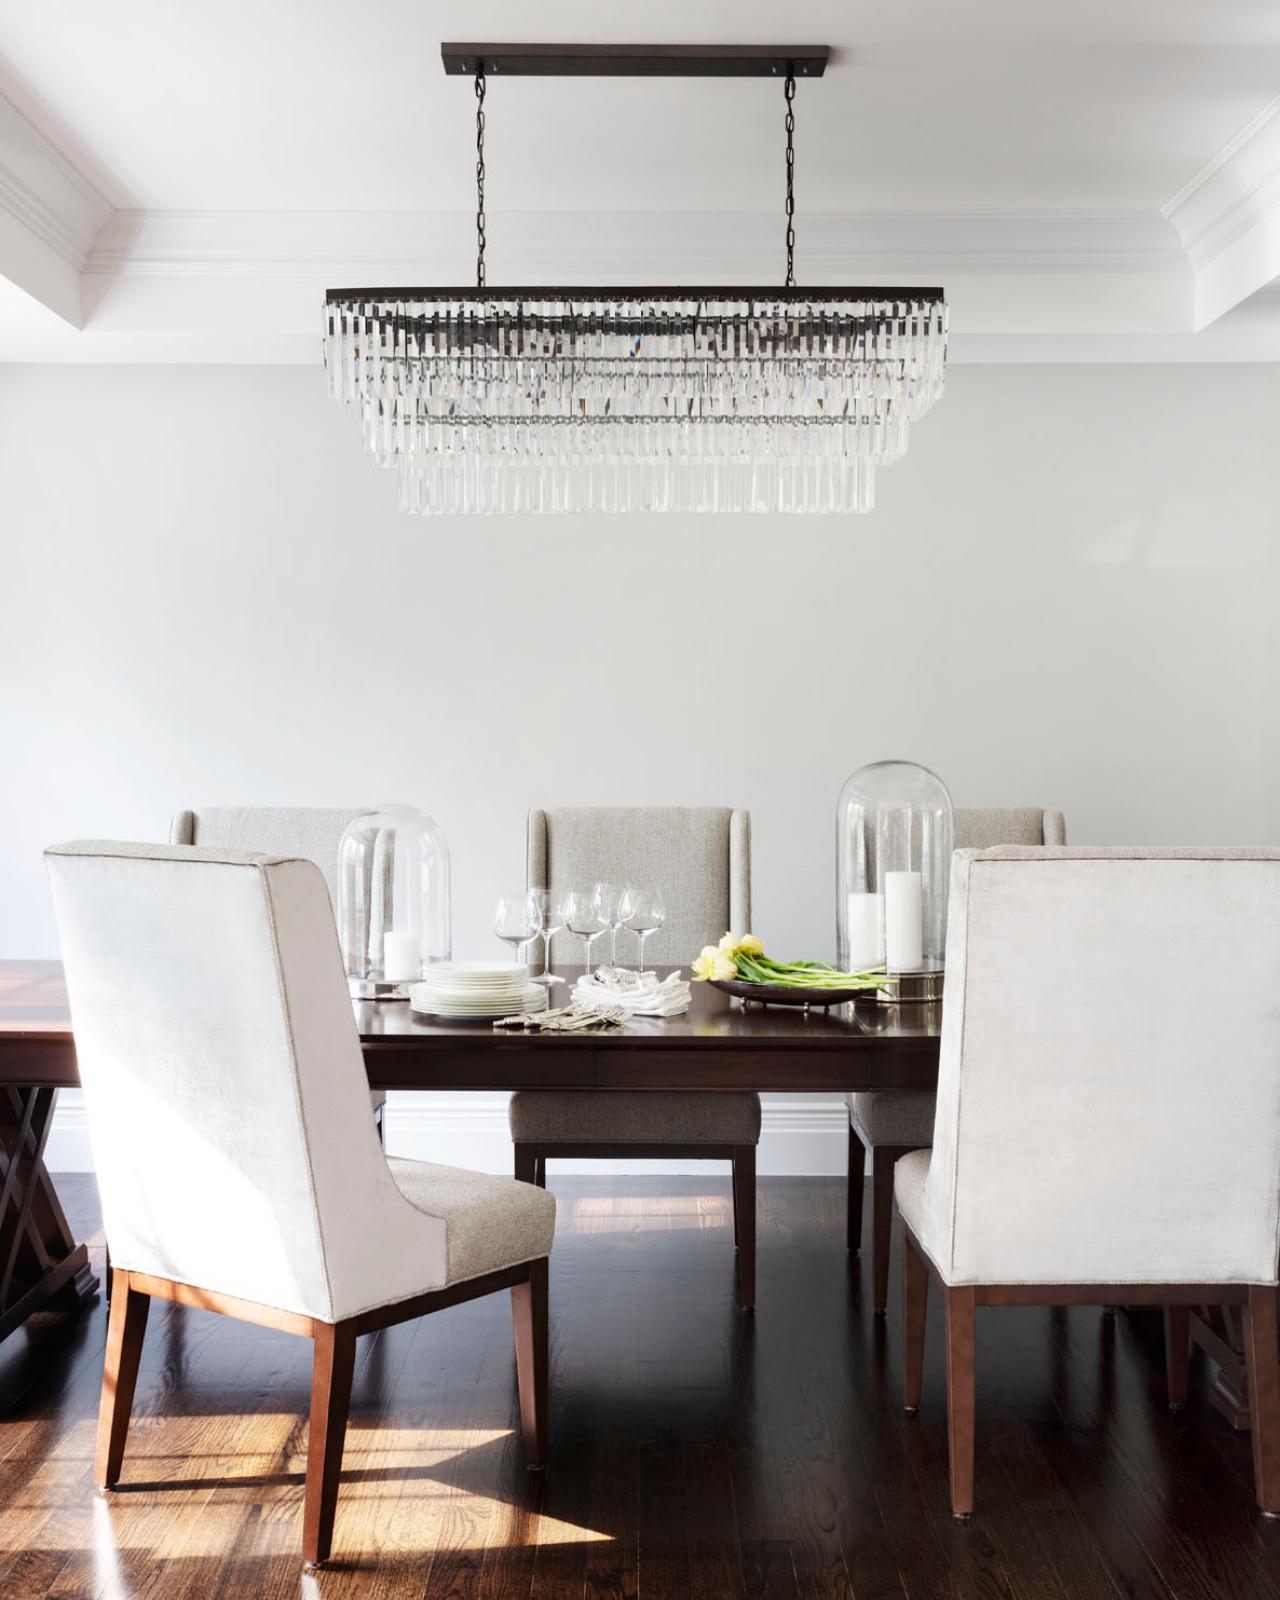 How To Choose Dining Room Lighting, Chandelier Lighting For Dining Room